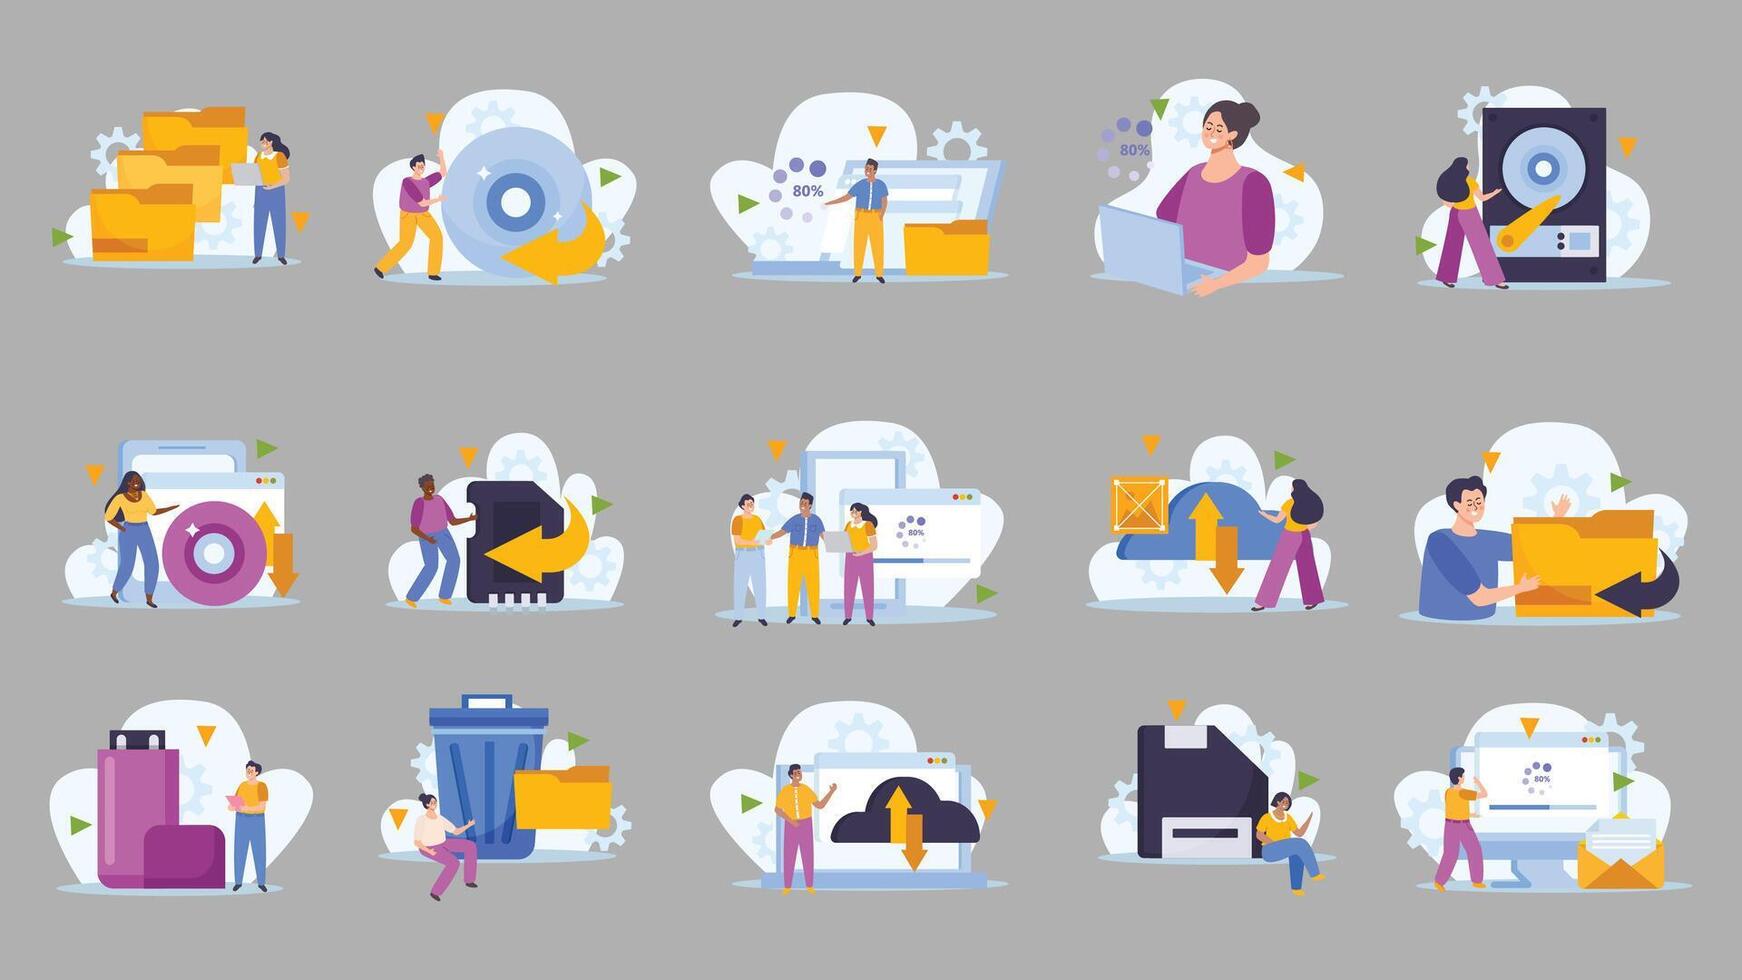 Backup and data recovery flat icons set. Flat vector concept of data recovery services. Backup data recovery set with hardware symbols and human characters